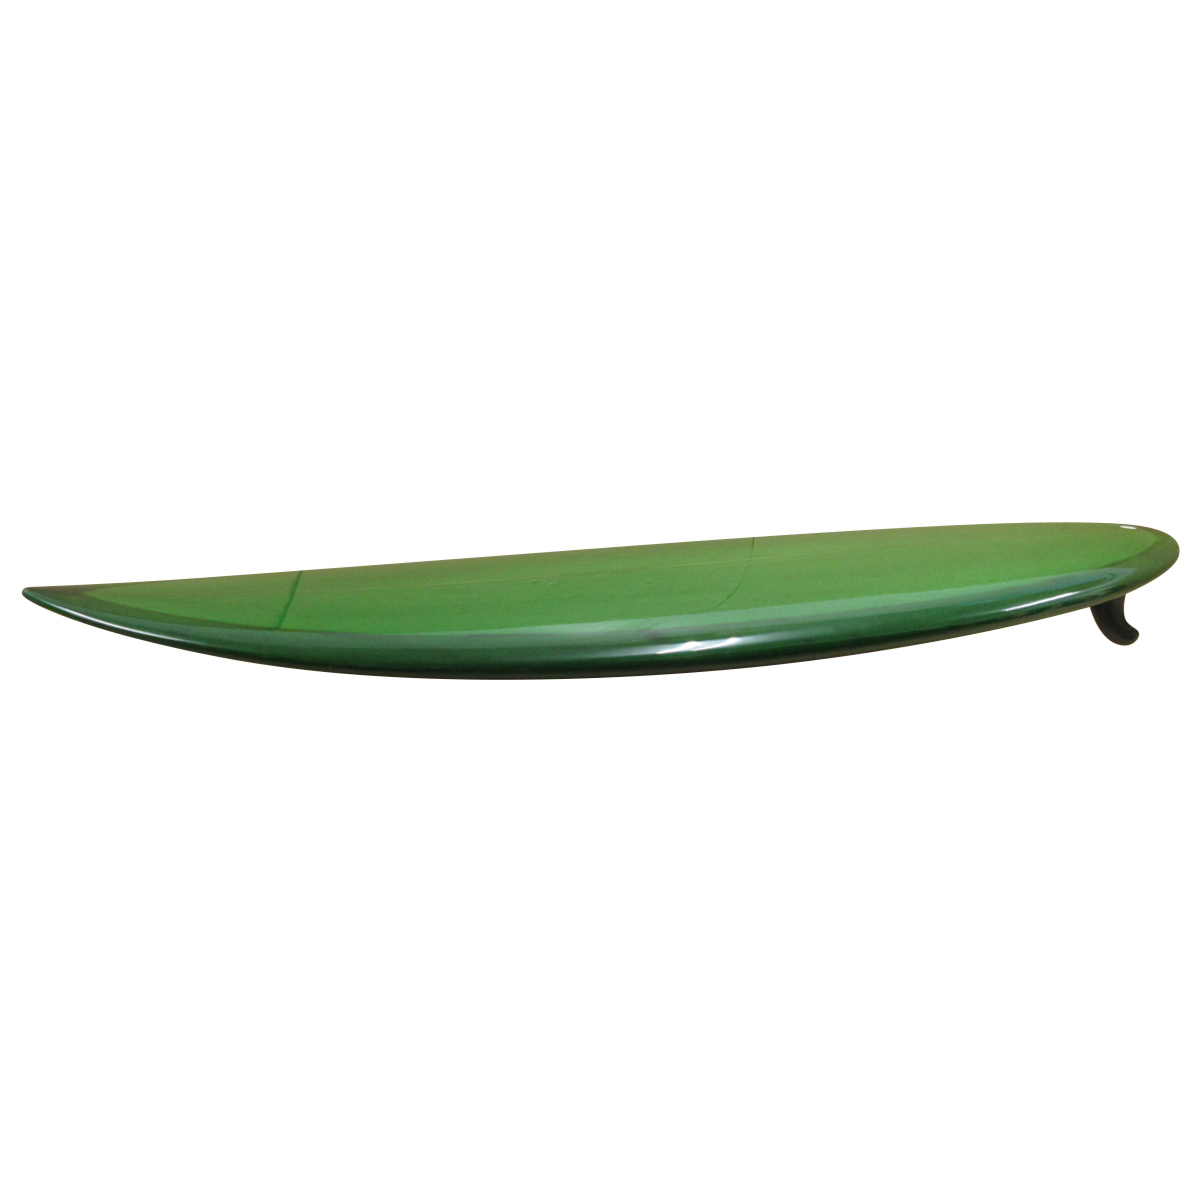 Nodecal / Round Tail Tri 6`4 Moss Green